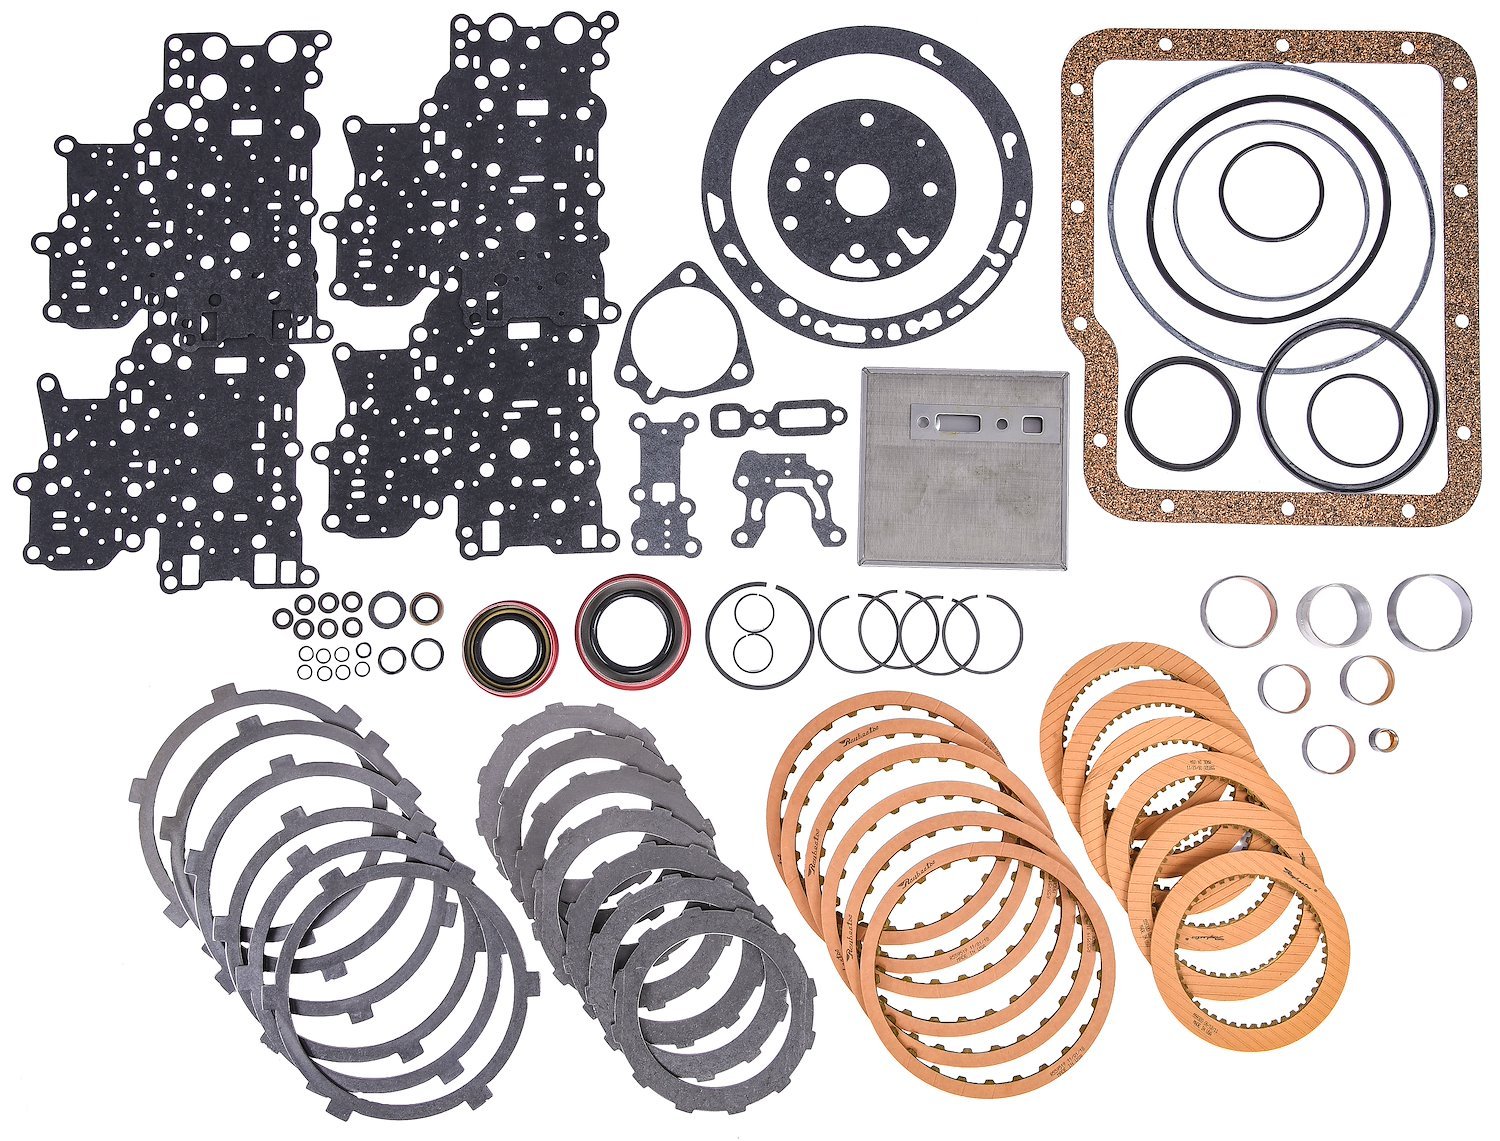 Automatic Transmission Rebuild Kit for 1962-1973 GM Powerglide